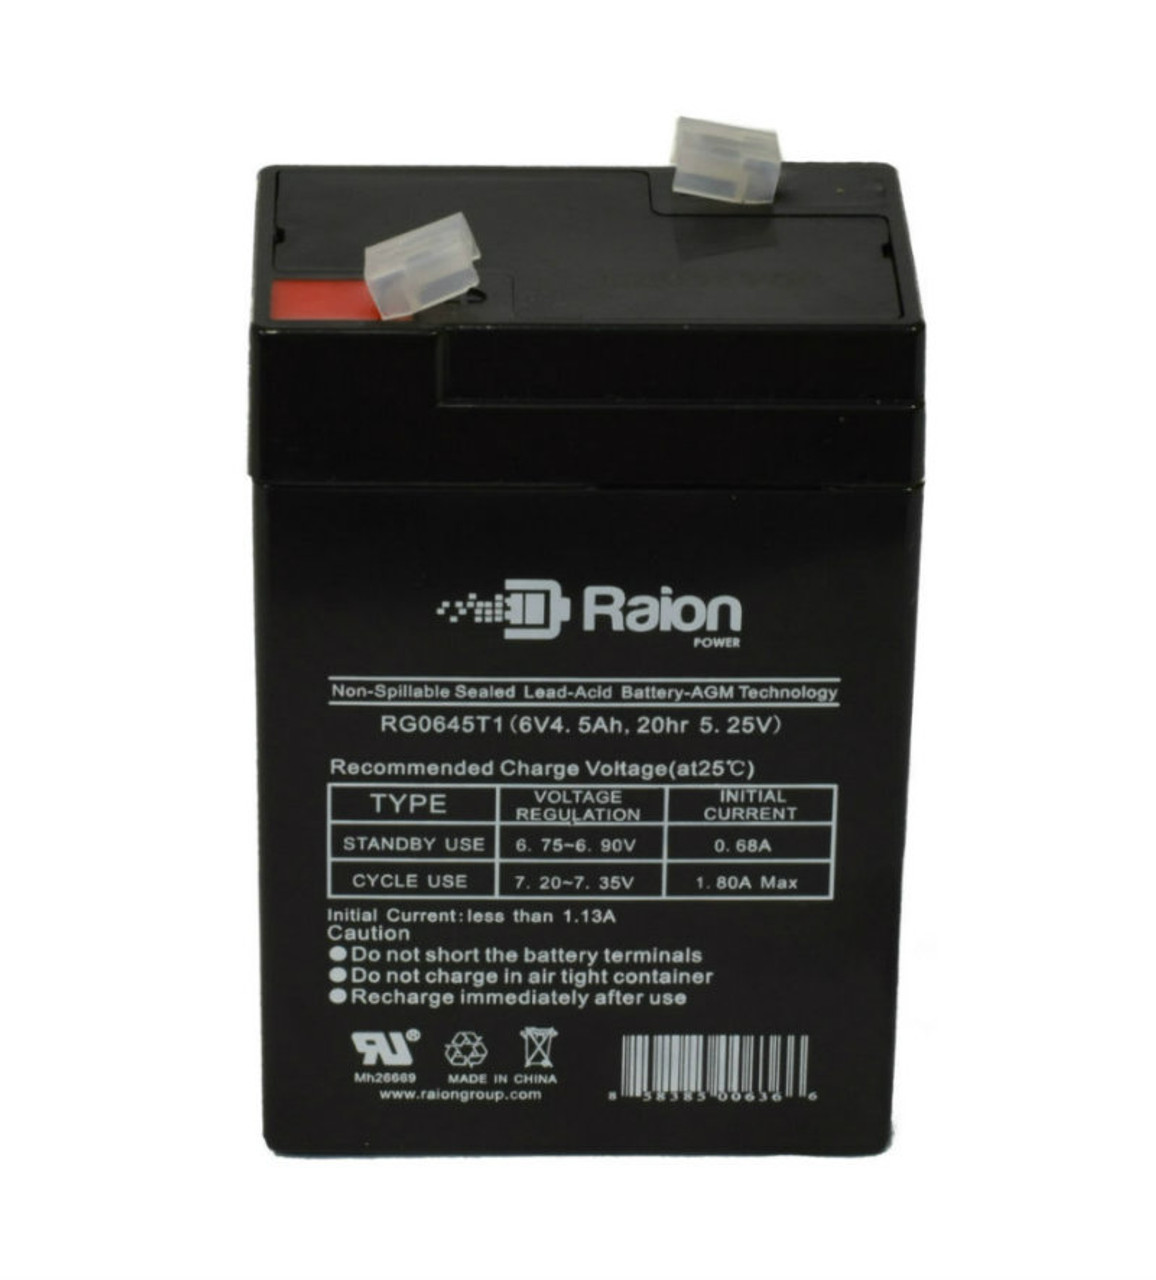 Raion Power RG0645T1 Replacement Battery Cartridge for Peg Perego DM 6-4.5